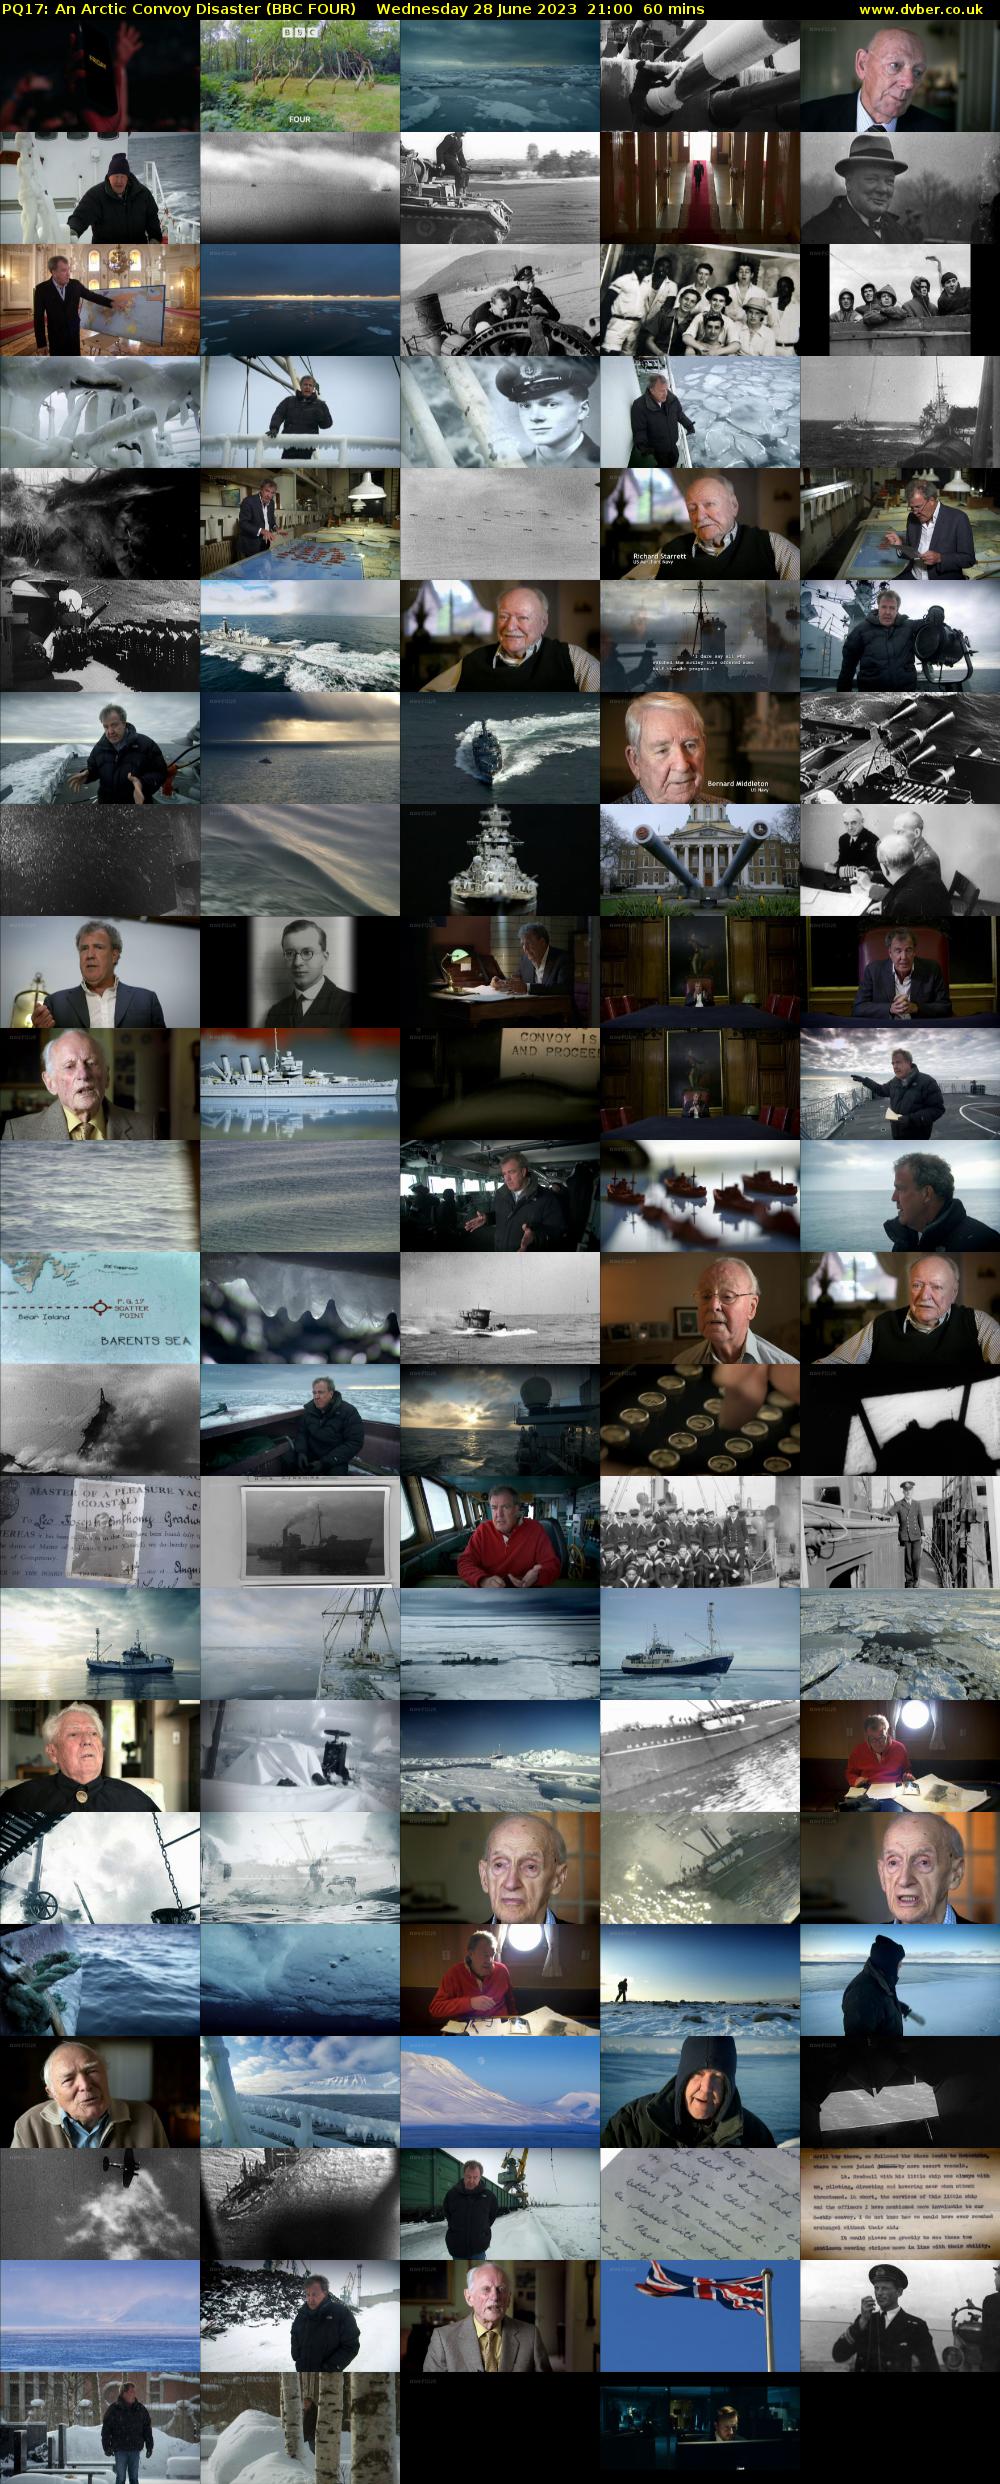 PQ17: An Arctic Convoy Disaster (BBC FOUR) Wednesday 28 June 2023 21:00 - 22:00